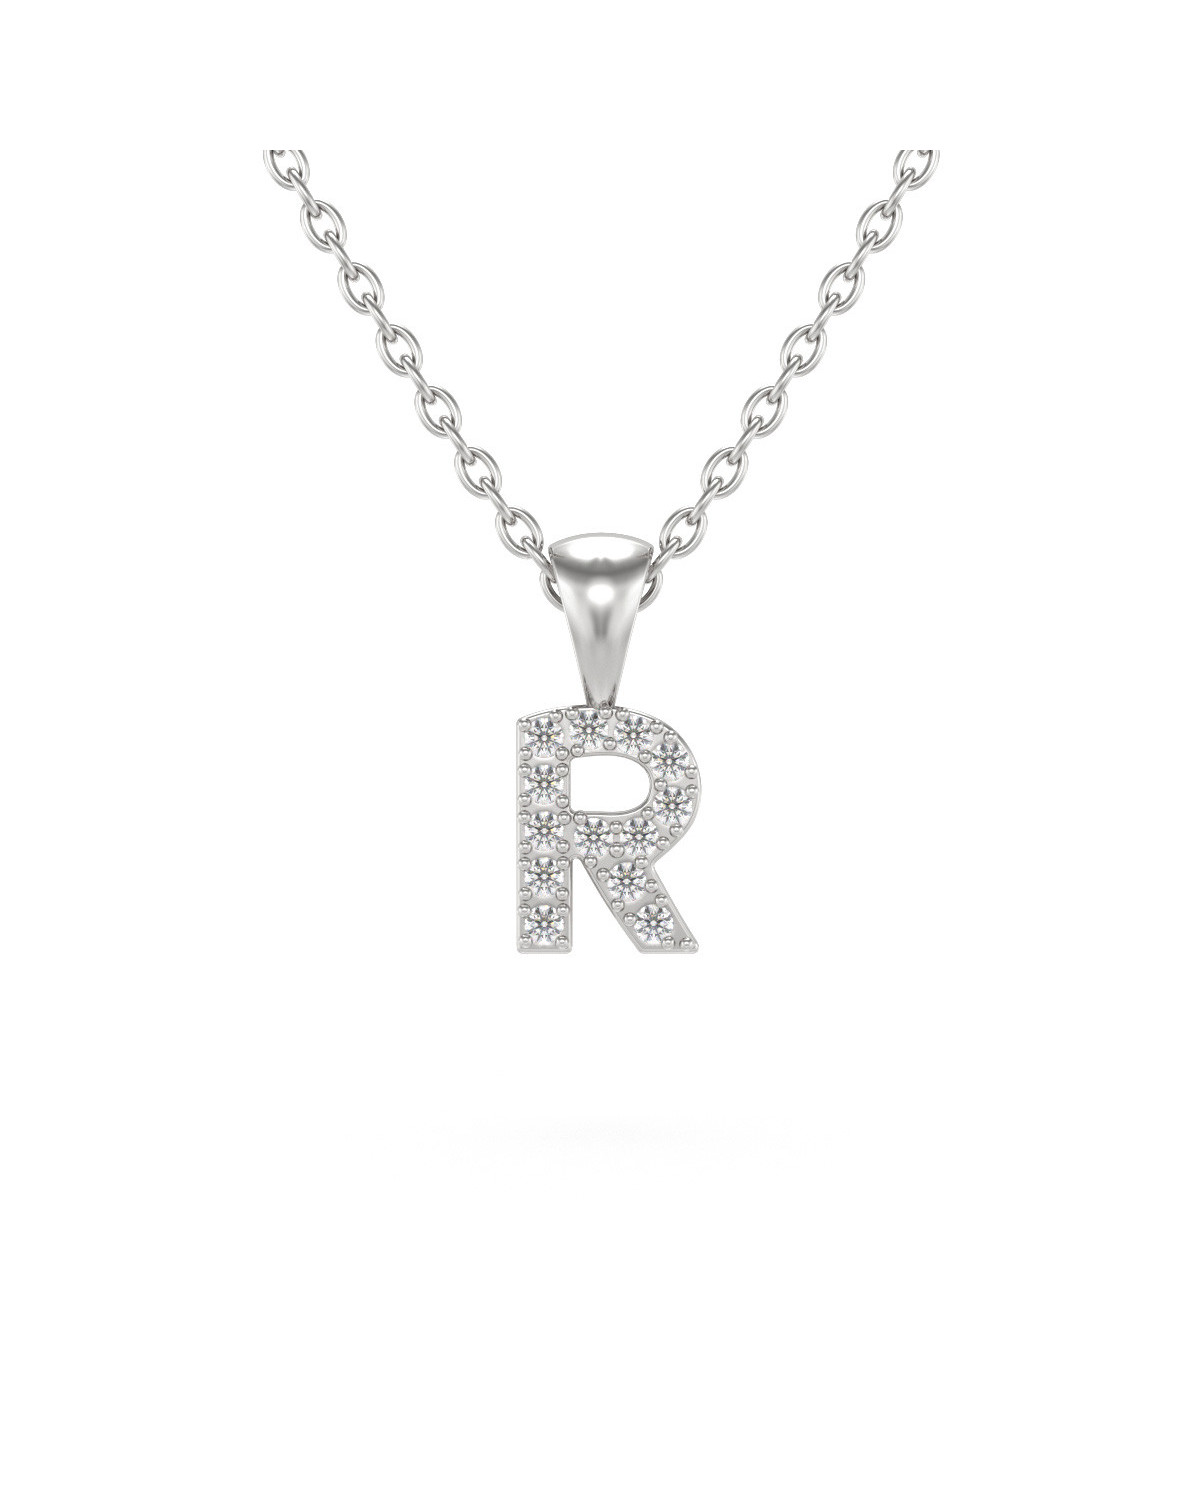 Collier Pendentif Lettre R Or Blanc Diamant Chaine Or incluse 0.72grs